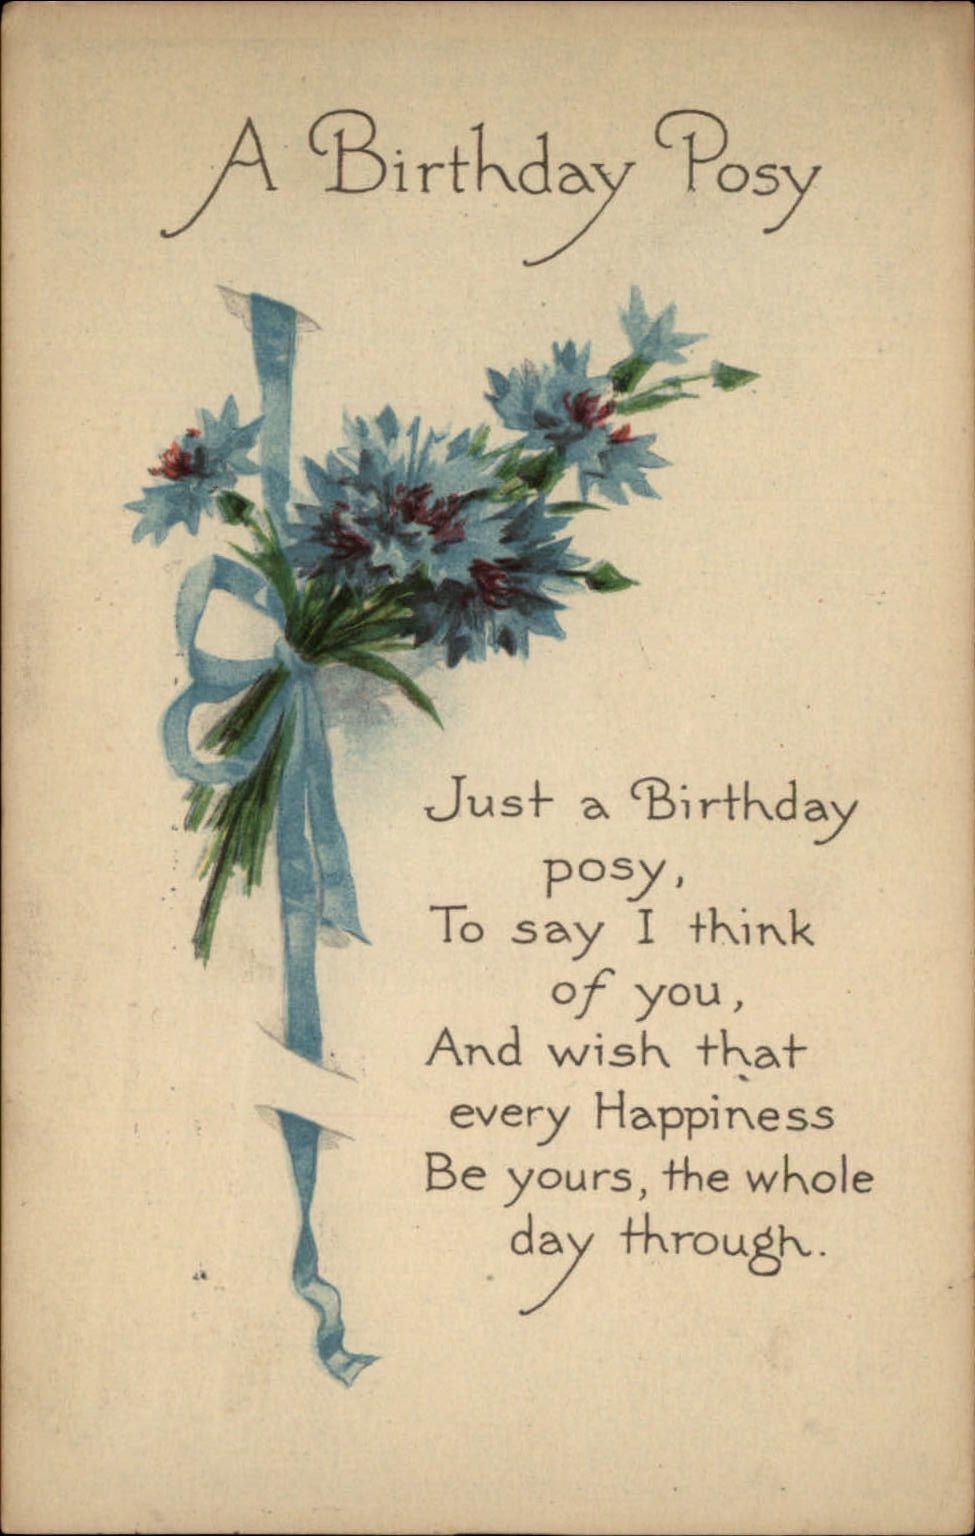 Birthday poem Gibson Art floral cornflower posy  1917 to LB Chaloux Rochester NY